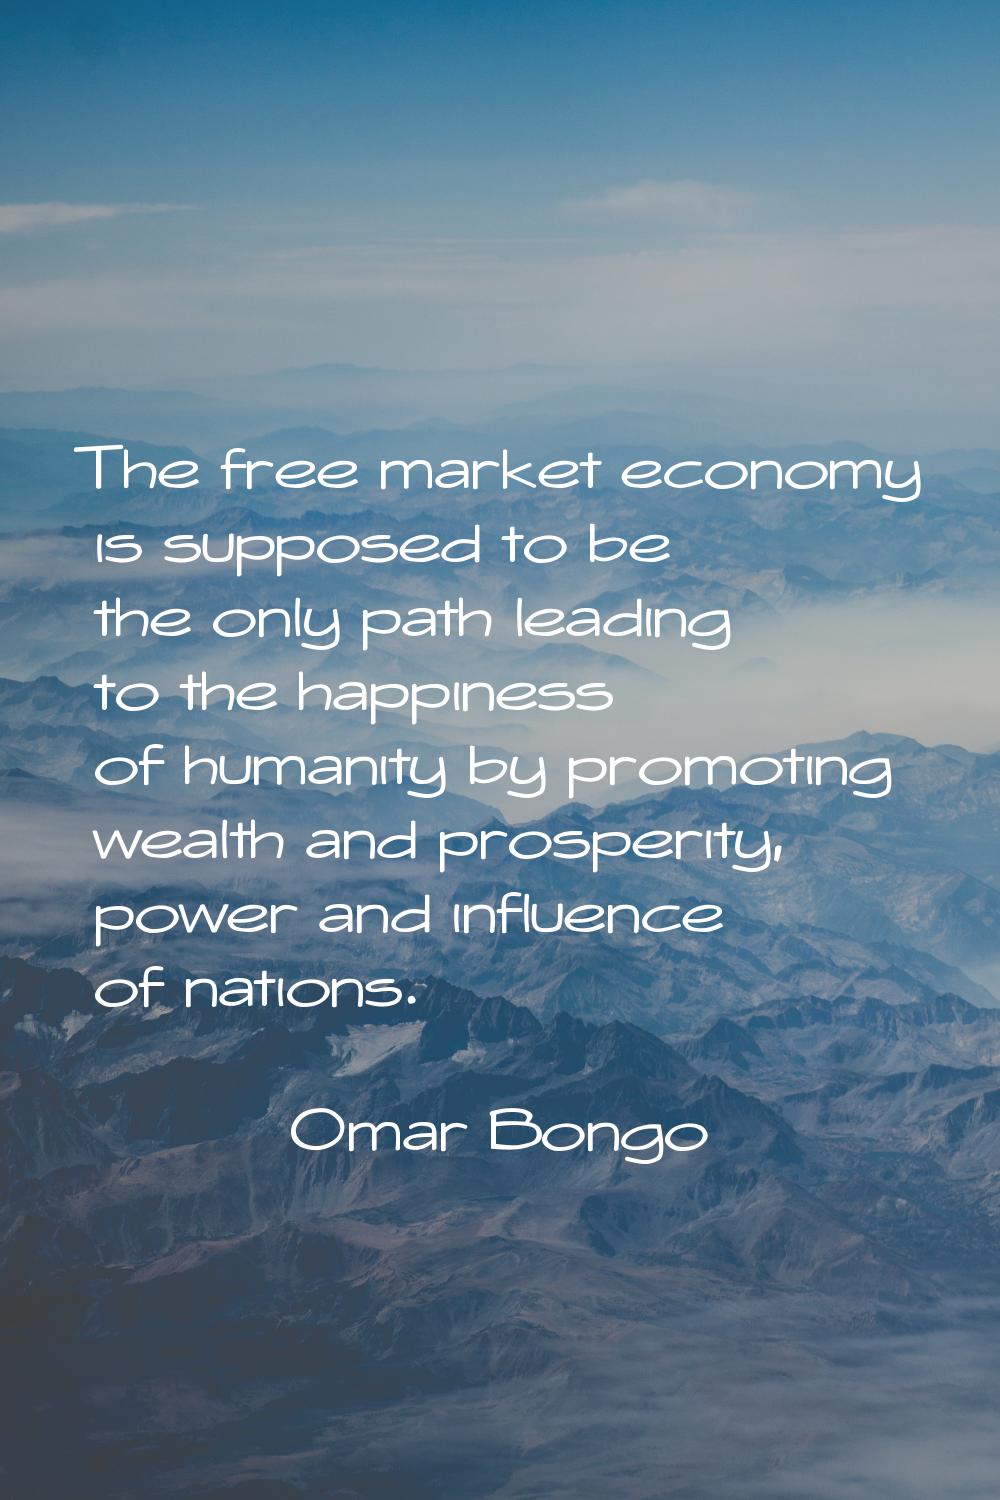 The free market economy is supposed to be the only path leading to the happiness of humanity by pro